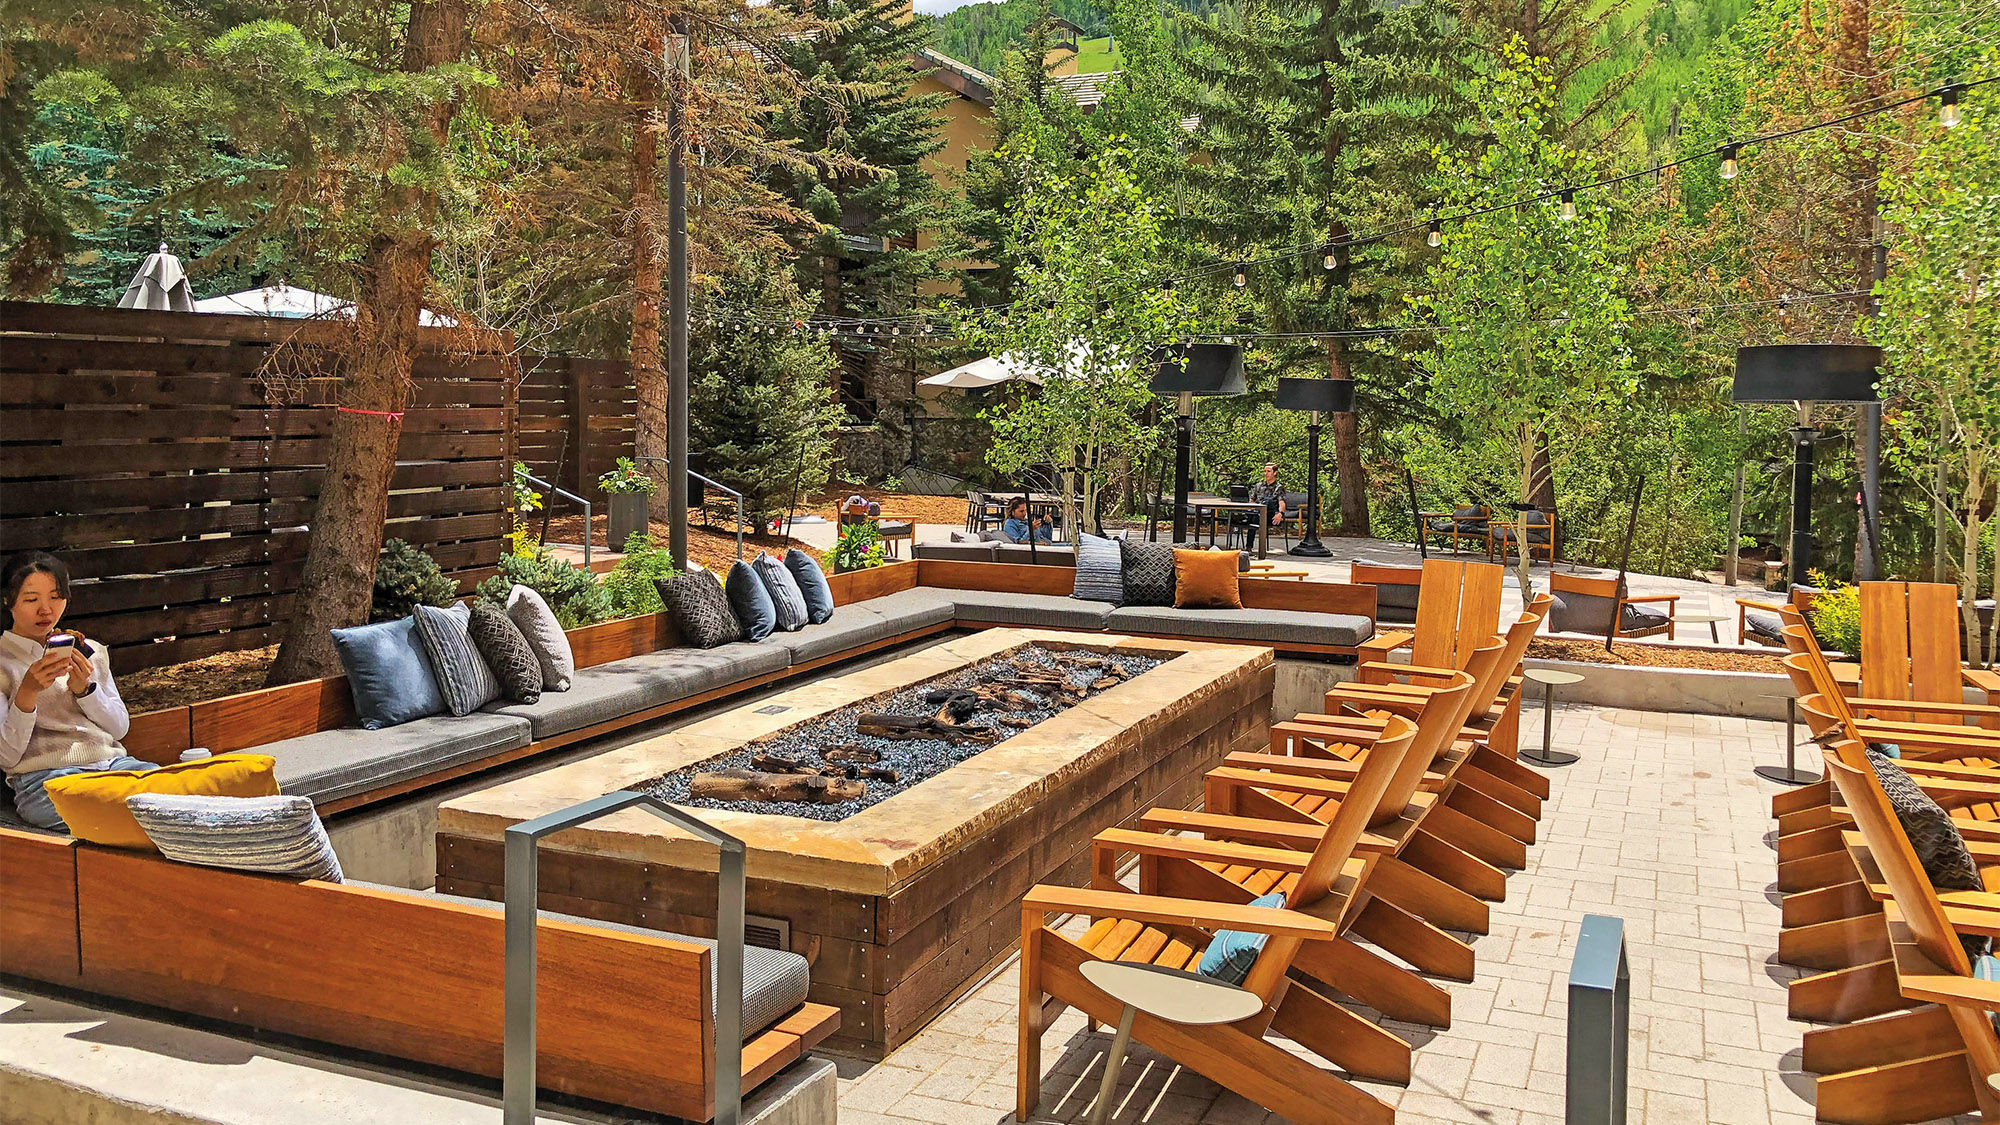 A cozy outdoor patio area at the Hythe, a Luxury Collection Resort in Vail's Lionshead Village.